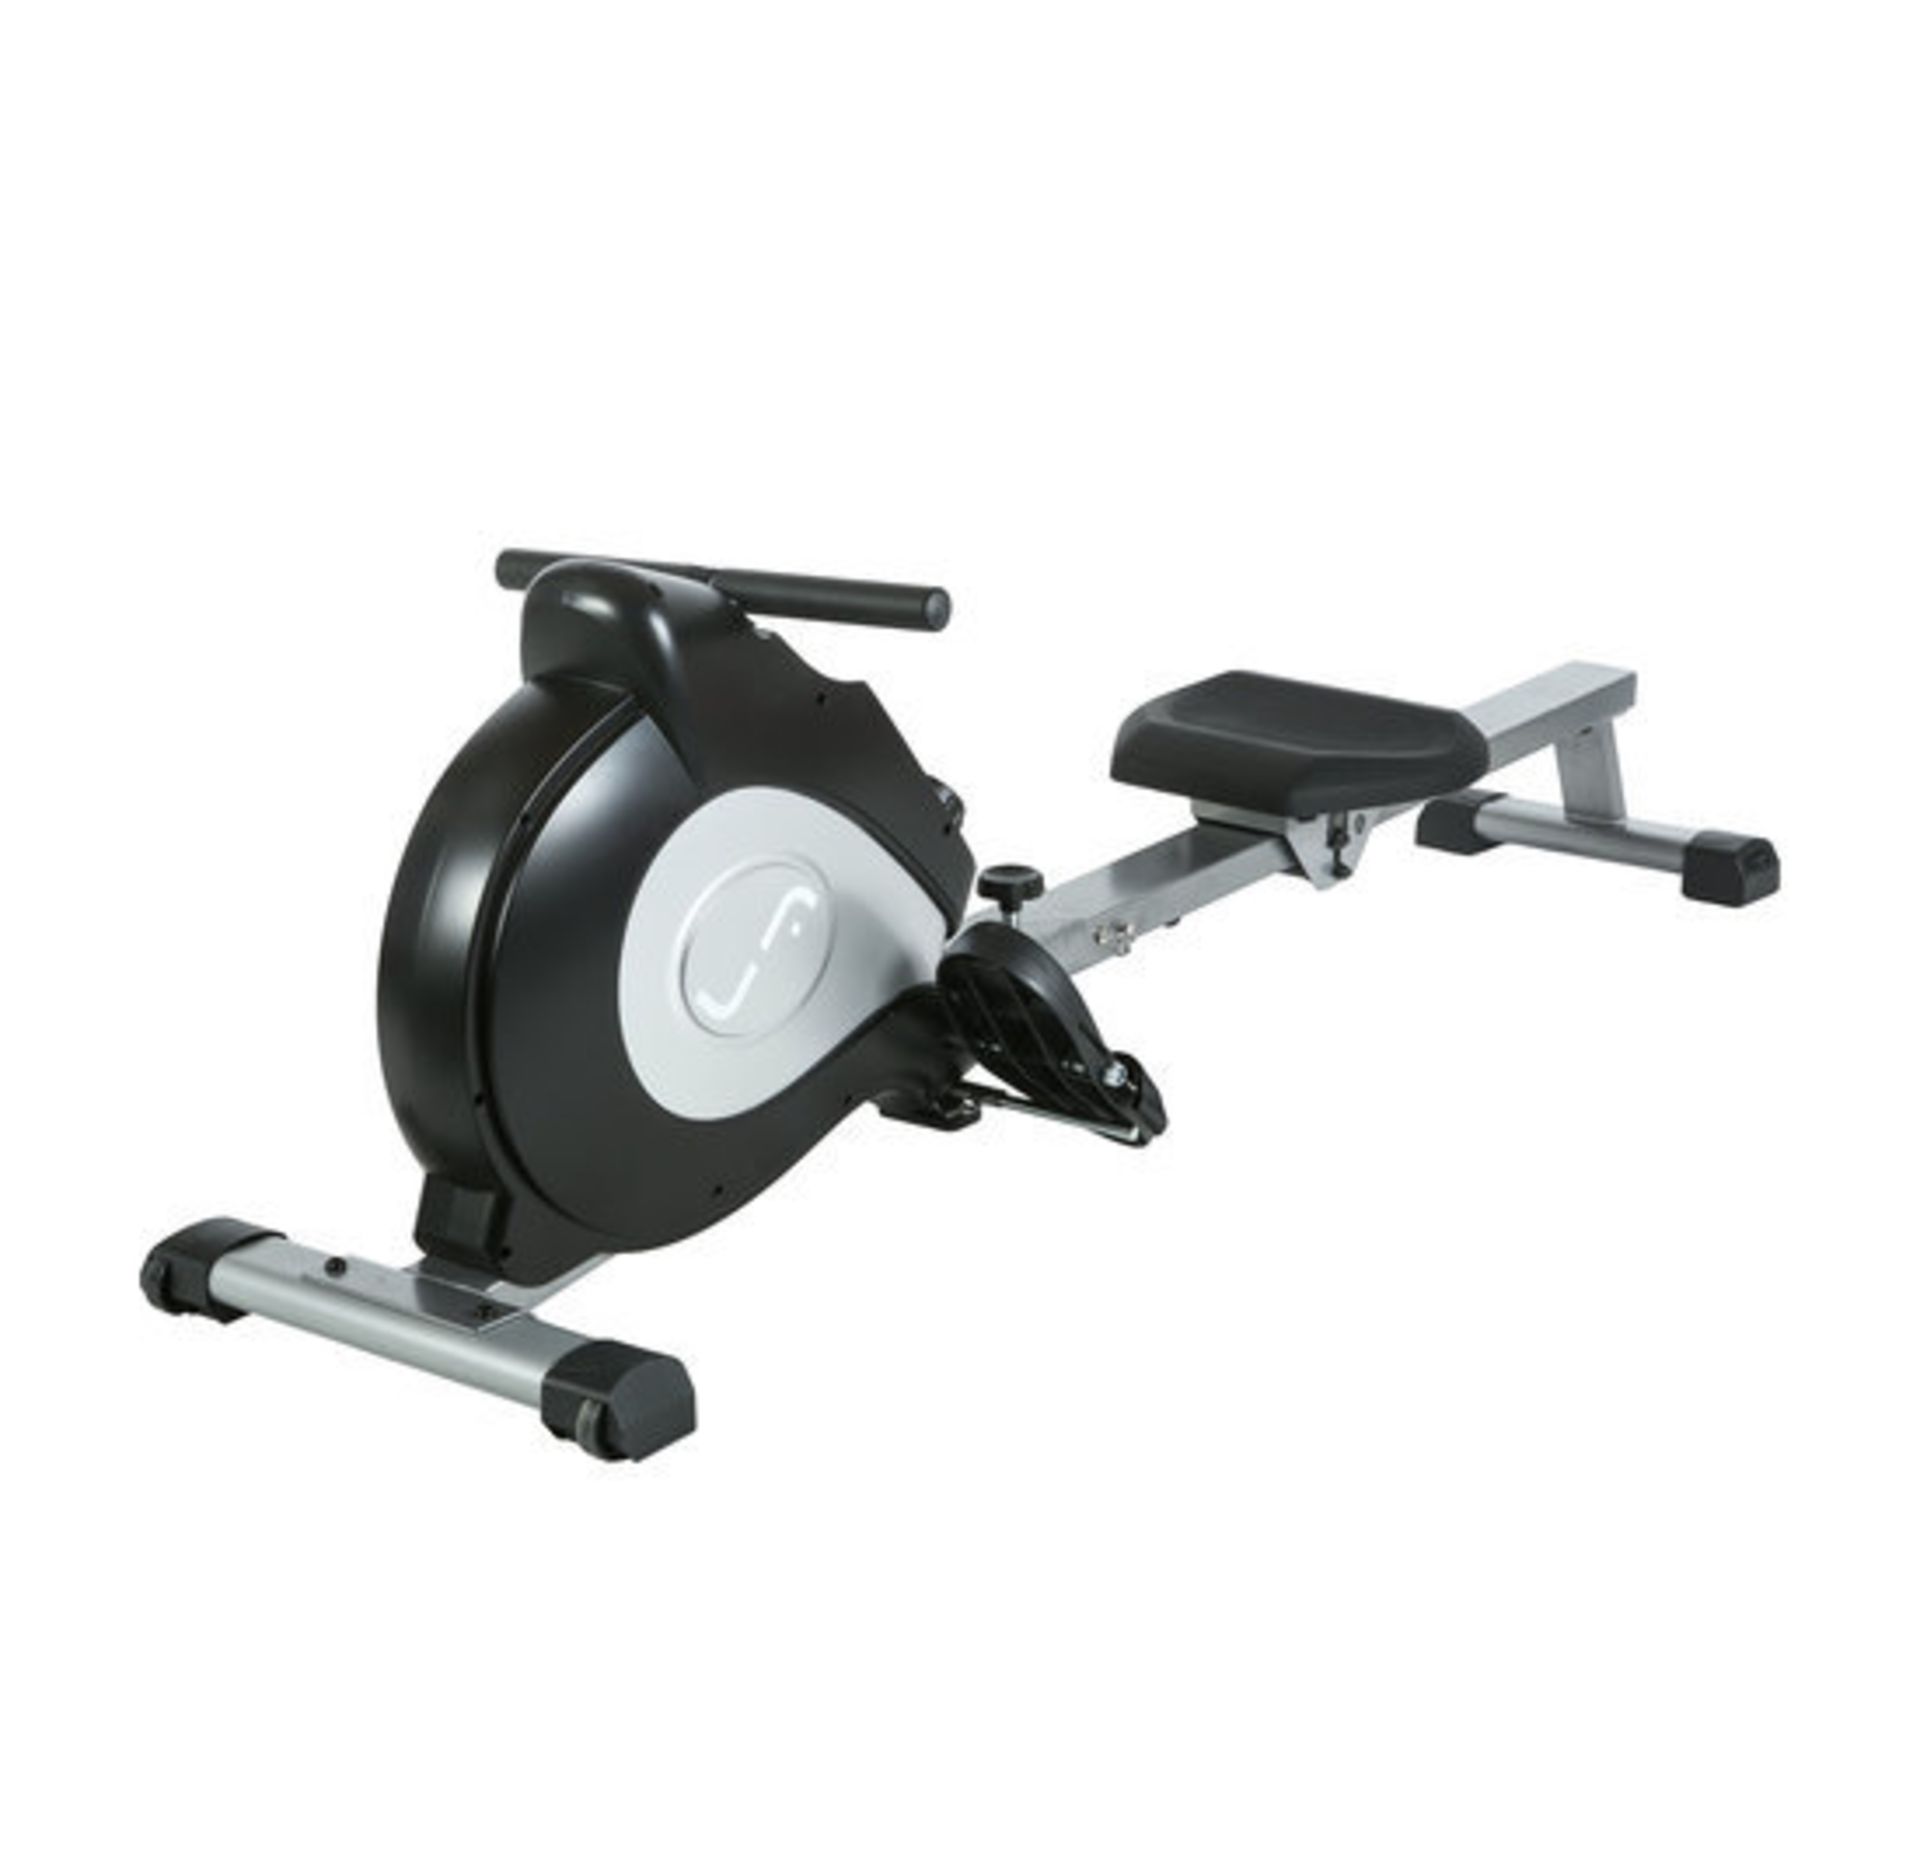 10 X BRAND NEW ROWFIT-2.5 FOLDABLE ROWING MACHINE - *** RRP £2480 *** - Image 2 of 4